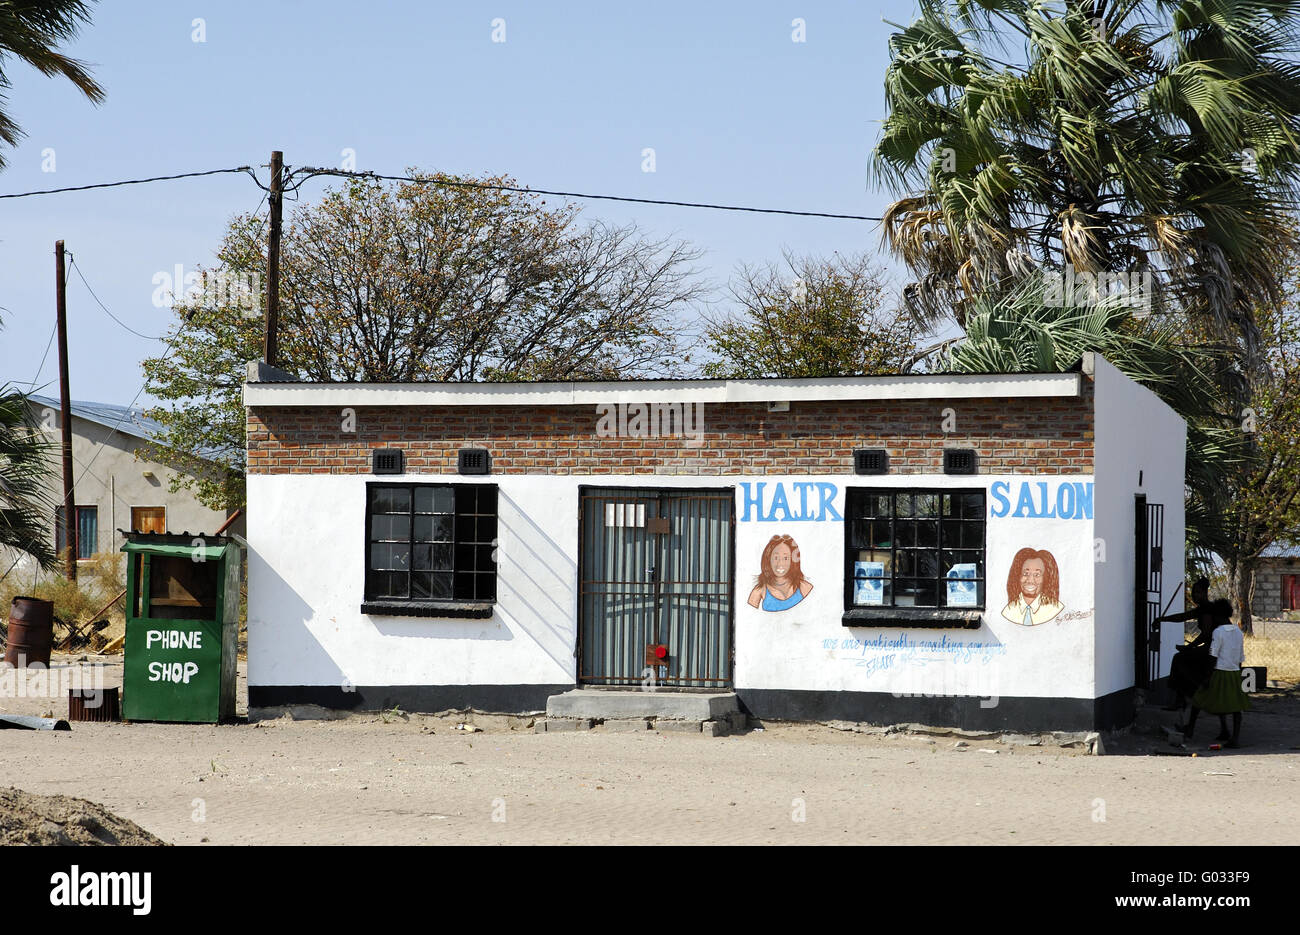 Hair salon and phone shop in an African village Stock Photo